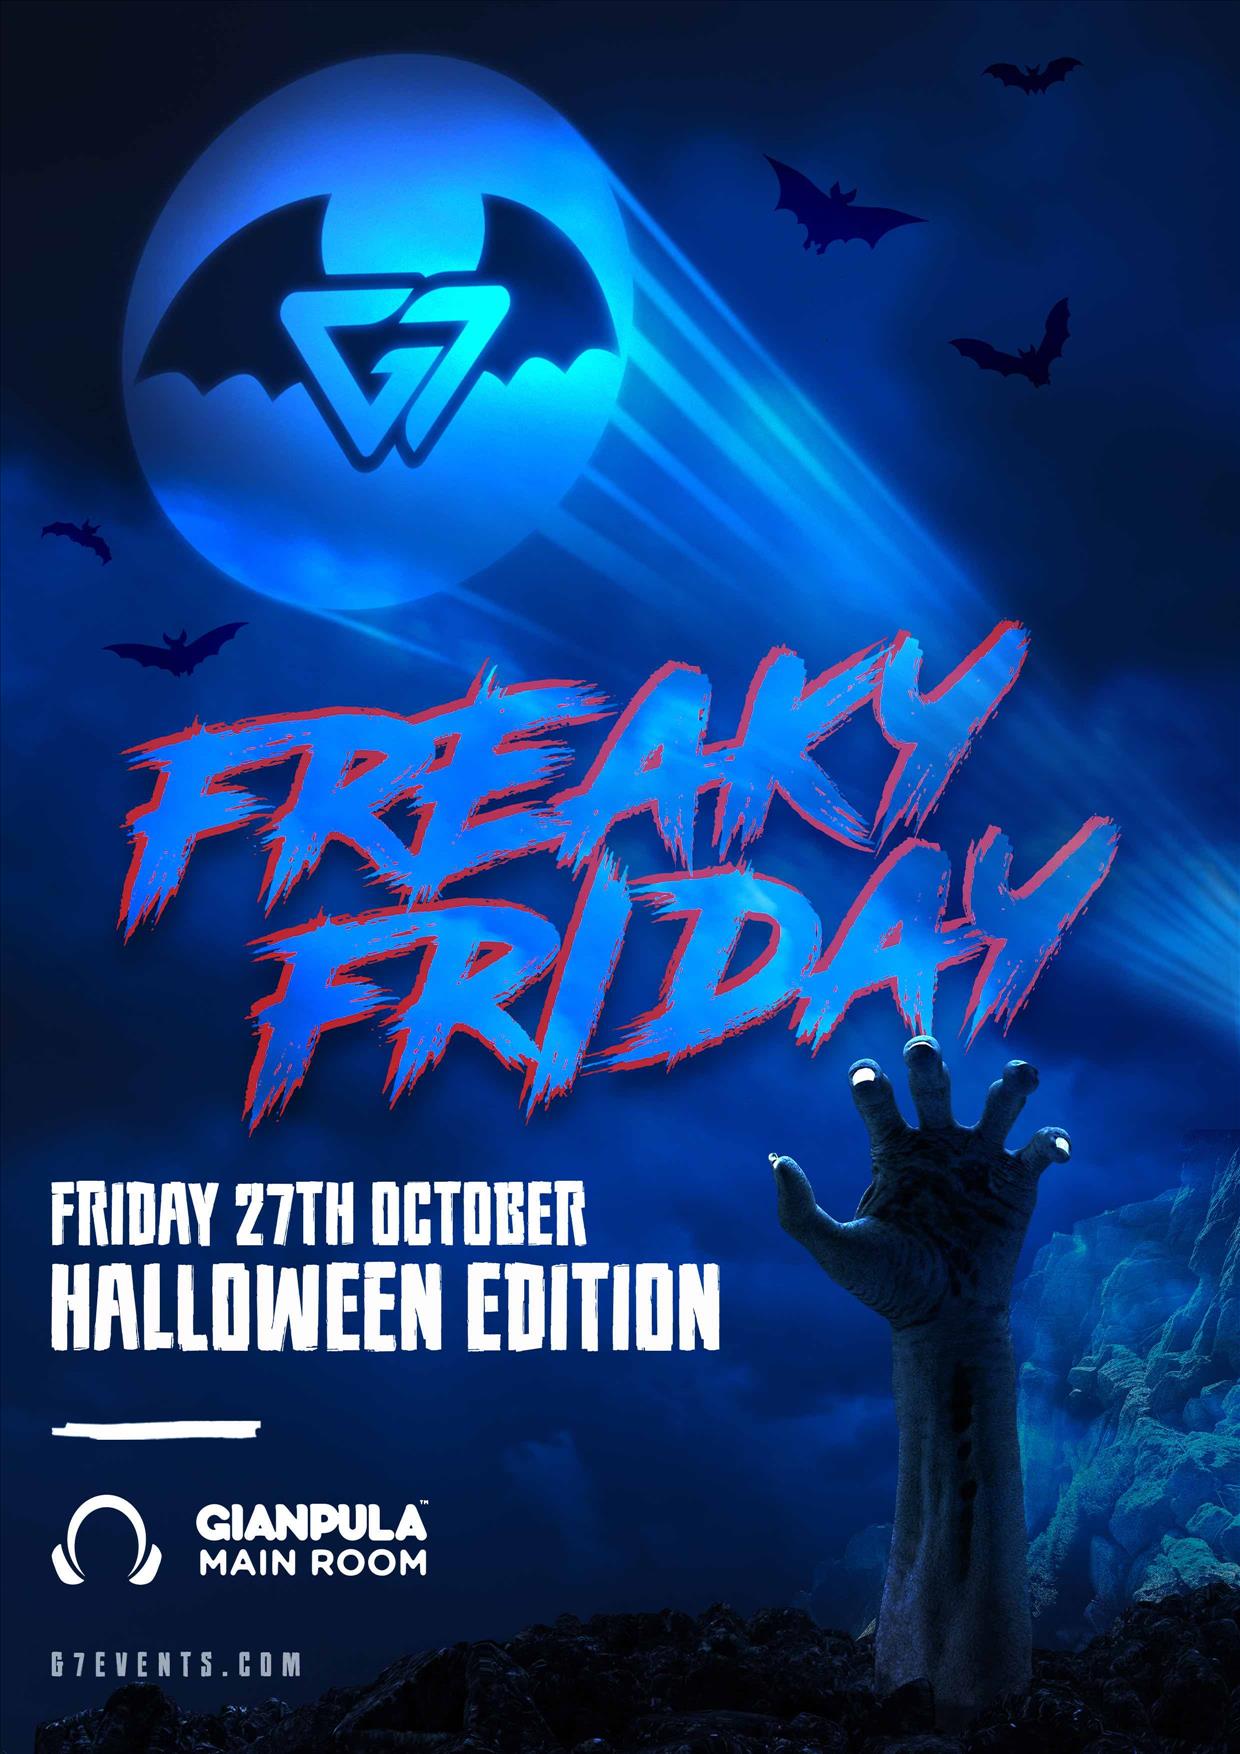 G7 Freaky Friday – Halloween Edition poster